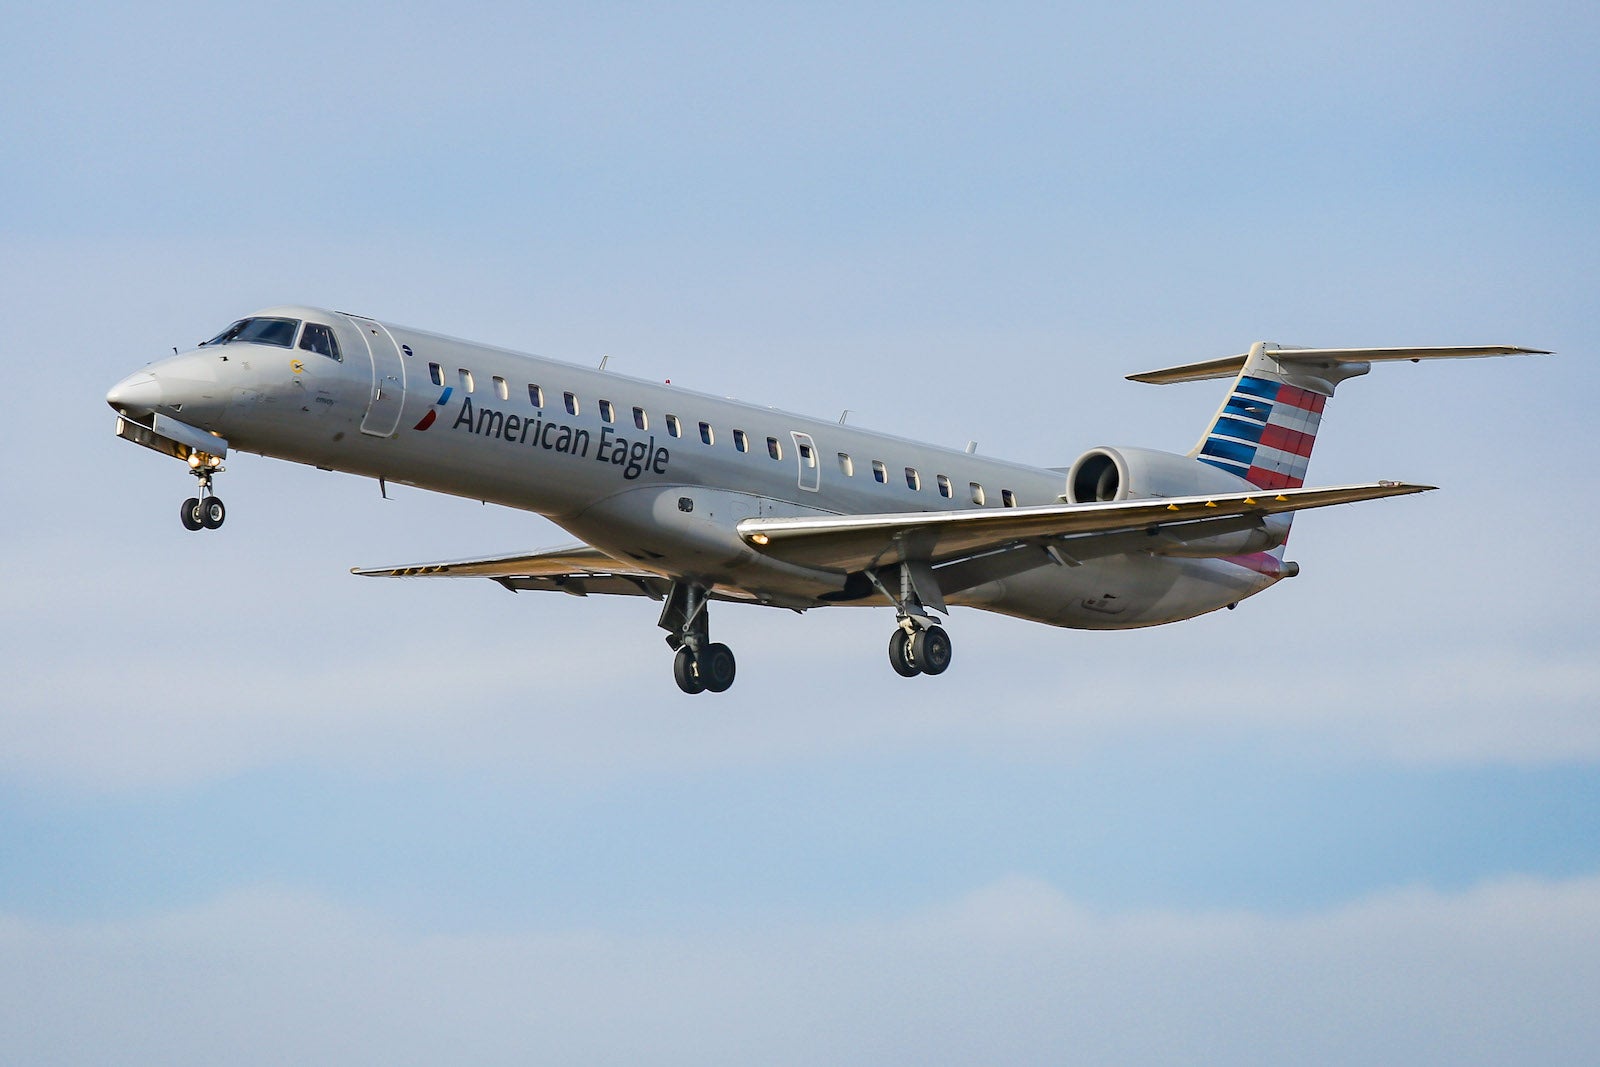 American Airlines Embraer ERJ-145 regional jet aircraft as seen on final approach landing at New York JFK international airport in NY, USA on February 13, 2020. The flight is operated by American Eagle, a regional branch of American Airlines ( Envoy Air ). The commercial airplane has the registration N605KS. American Airlines is a major US carrier with headquarters at Fort Worth. AA AAL is the largest airline in the world by fleet and passenger and member of Oneworld aviation alliance. (Photo by Nicolas Economou/NurPhoto)